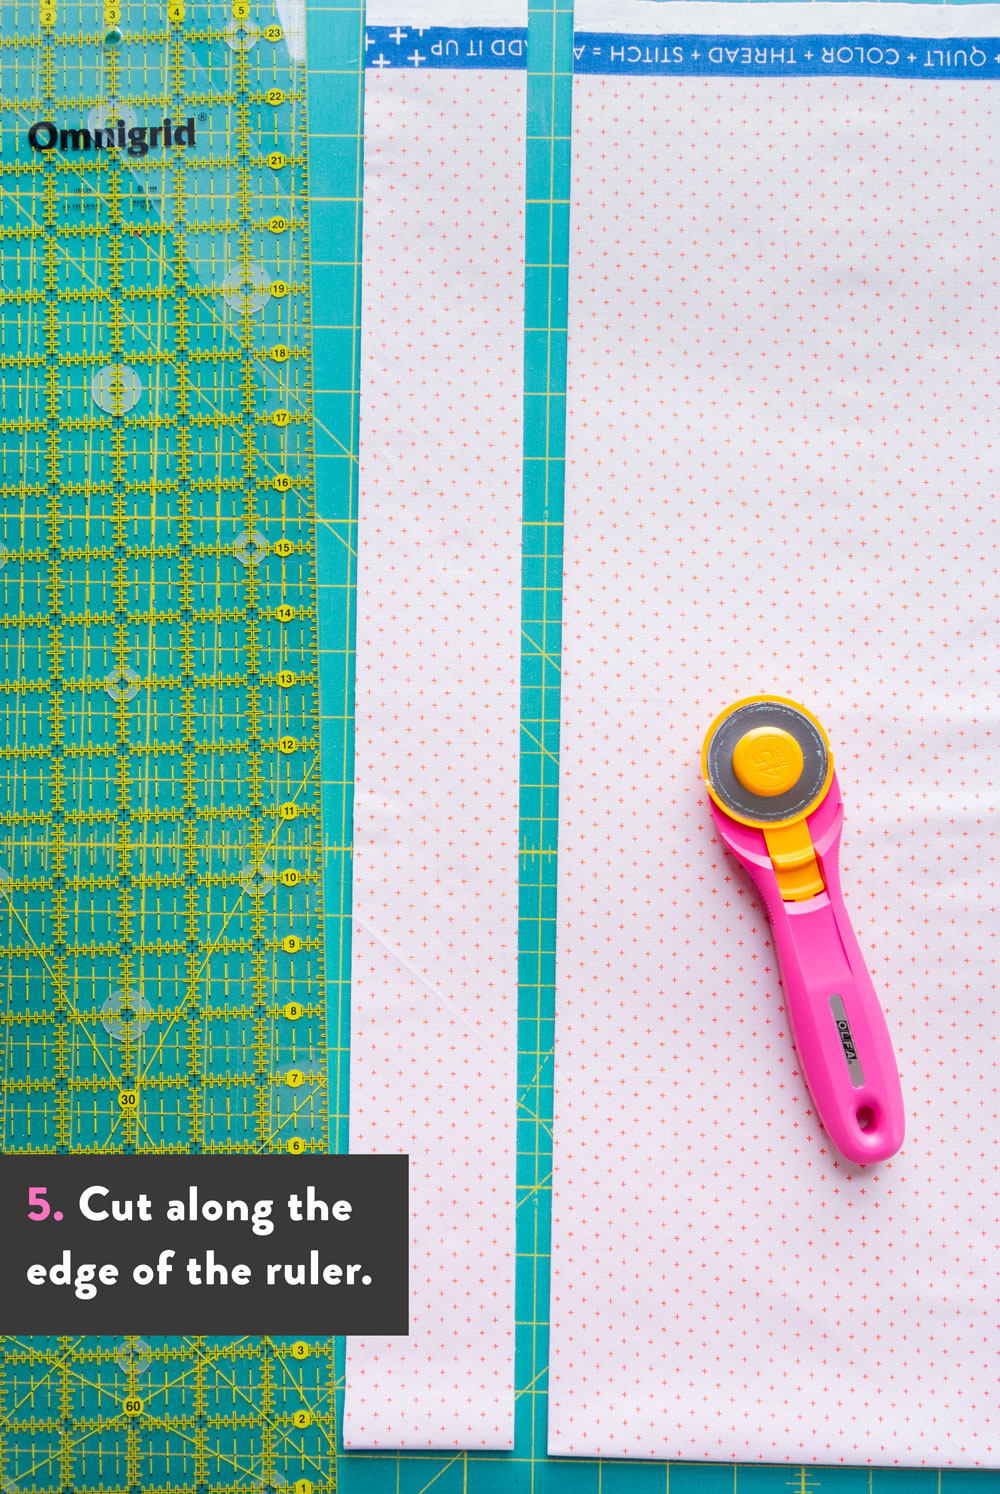 All of your common quilting questions are answered in this multi-series blog post. We cover the basics on cutting, sewing and ironing. In this post we cover an in-depth cutting tutorial and include a video!